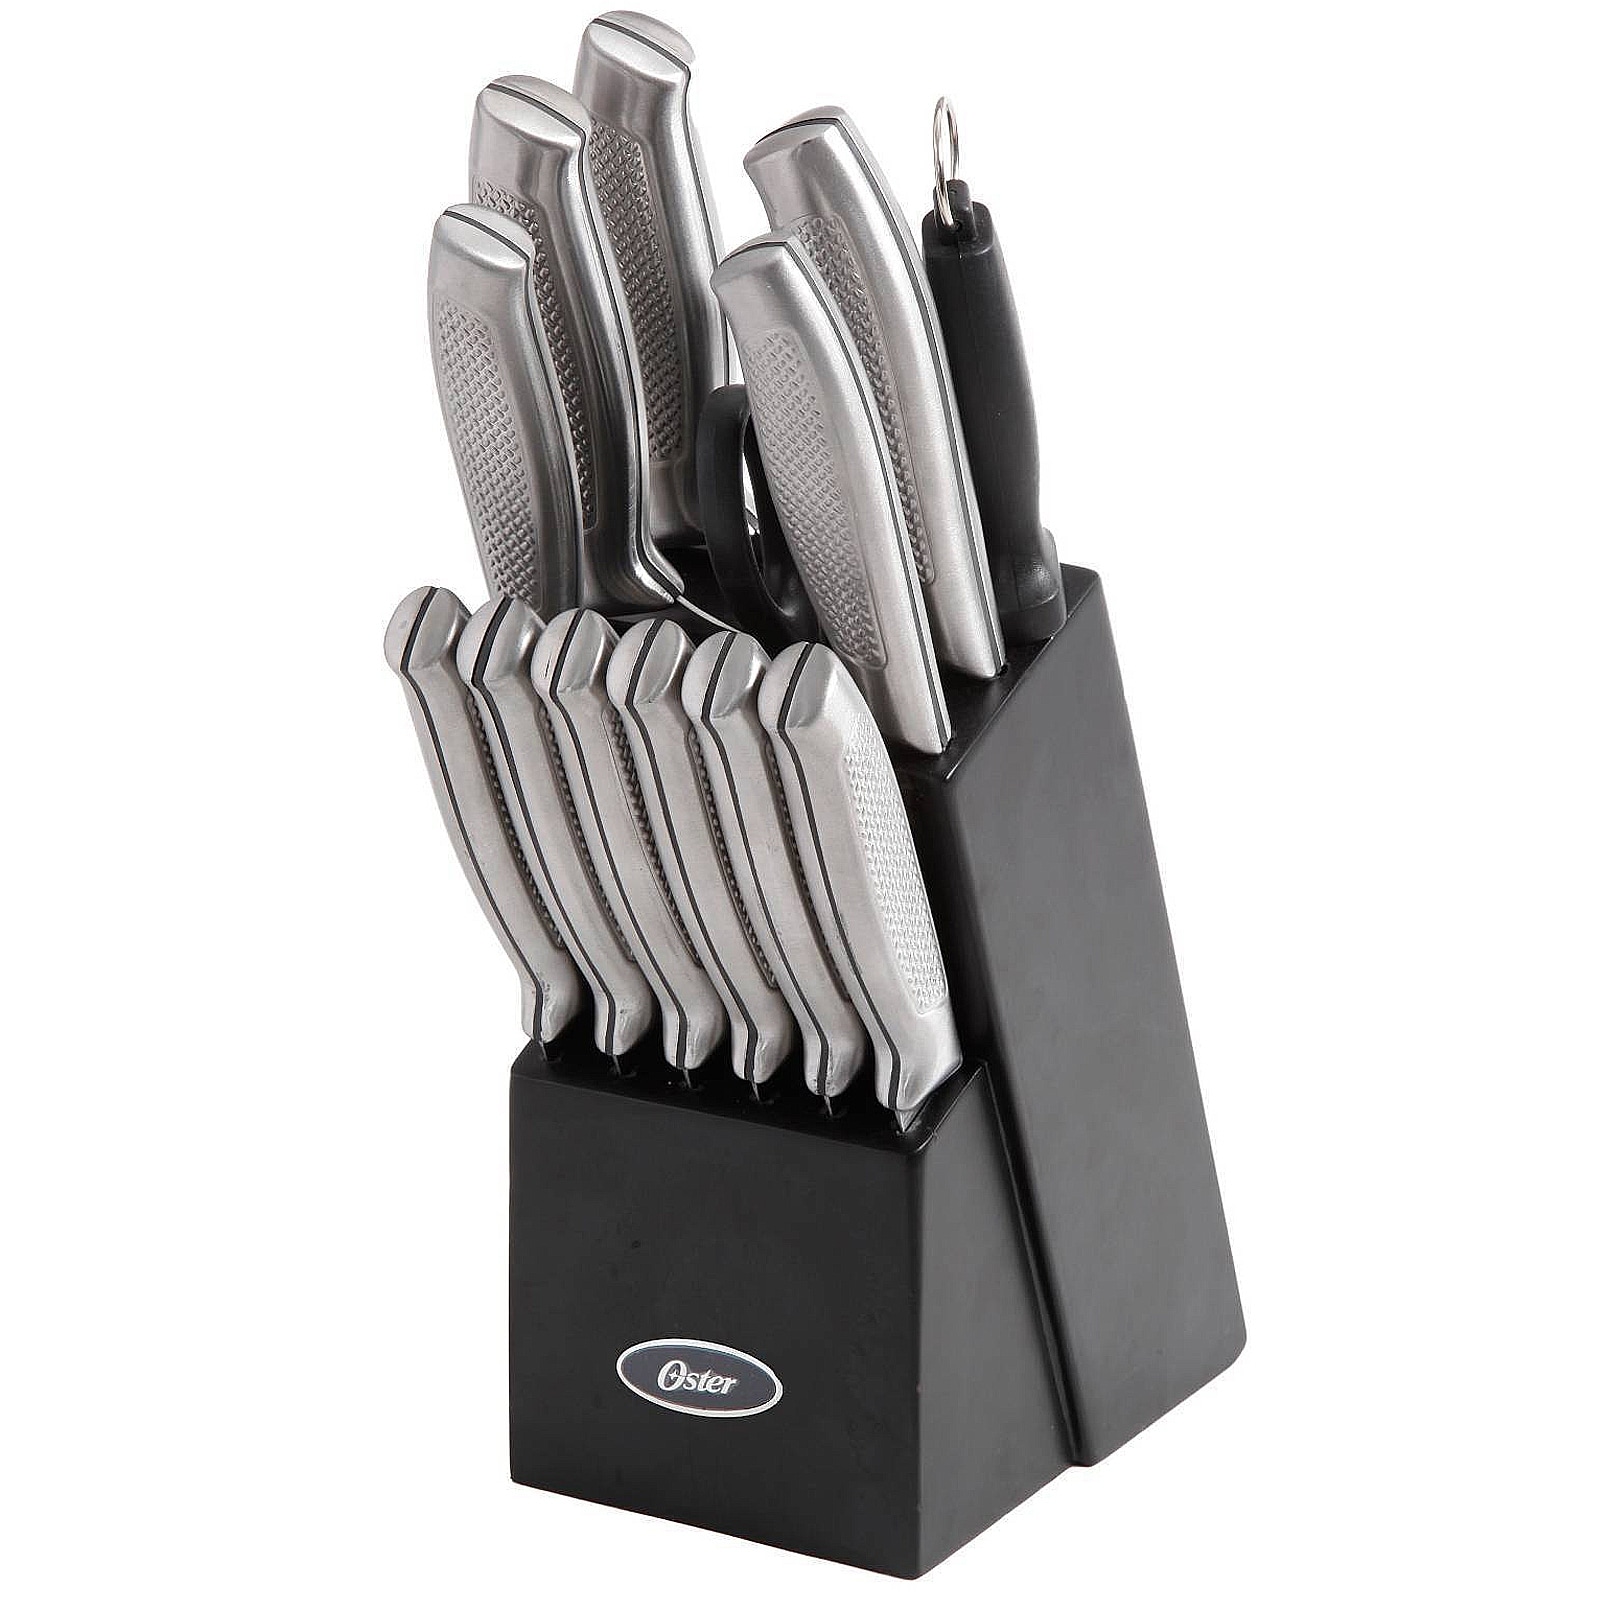 https://ak1.ostkcdn.com/images/products/is/images/direct/87f84b84fe95b91ce4608418a9163c3cab898222/Oster-Edgefield-14-Piece-Cutlery-Set.jpg